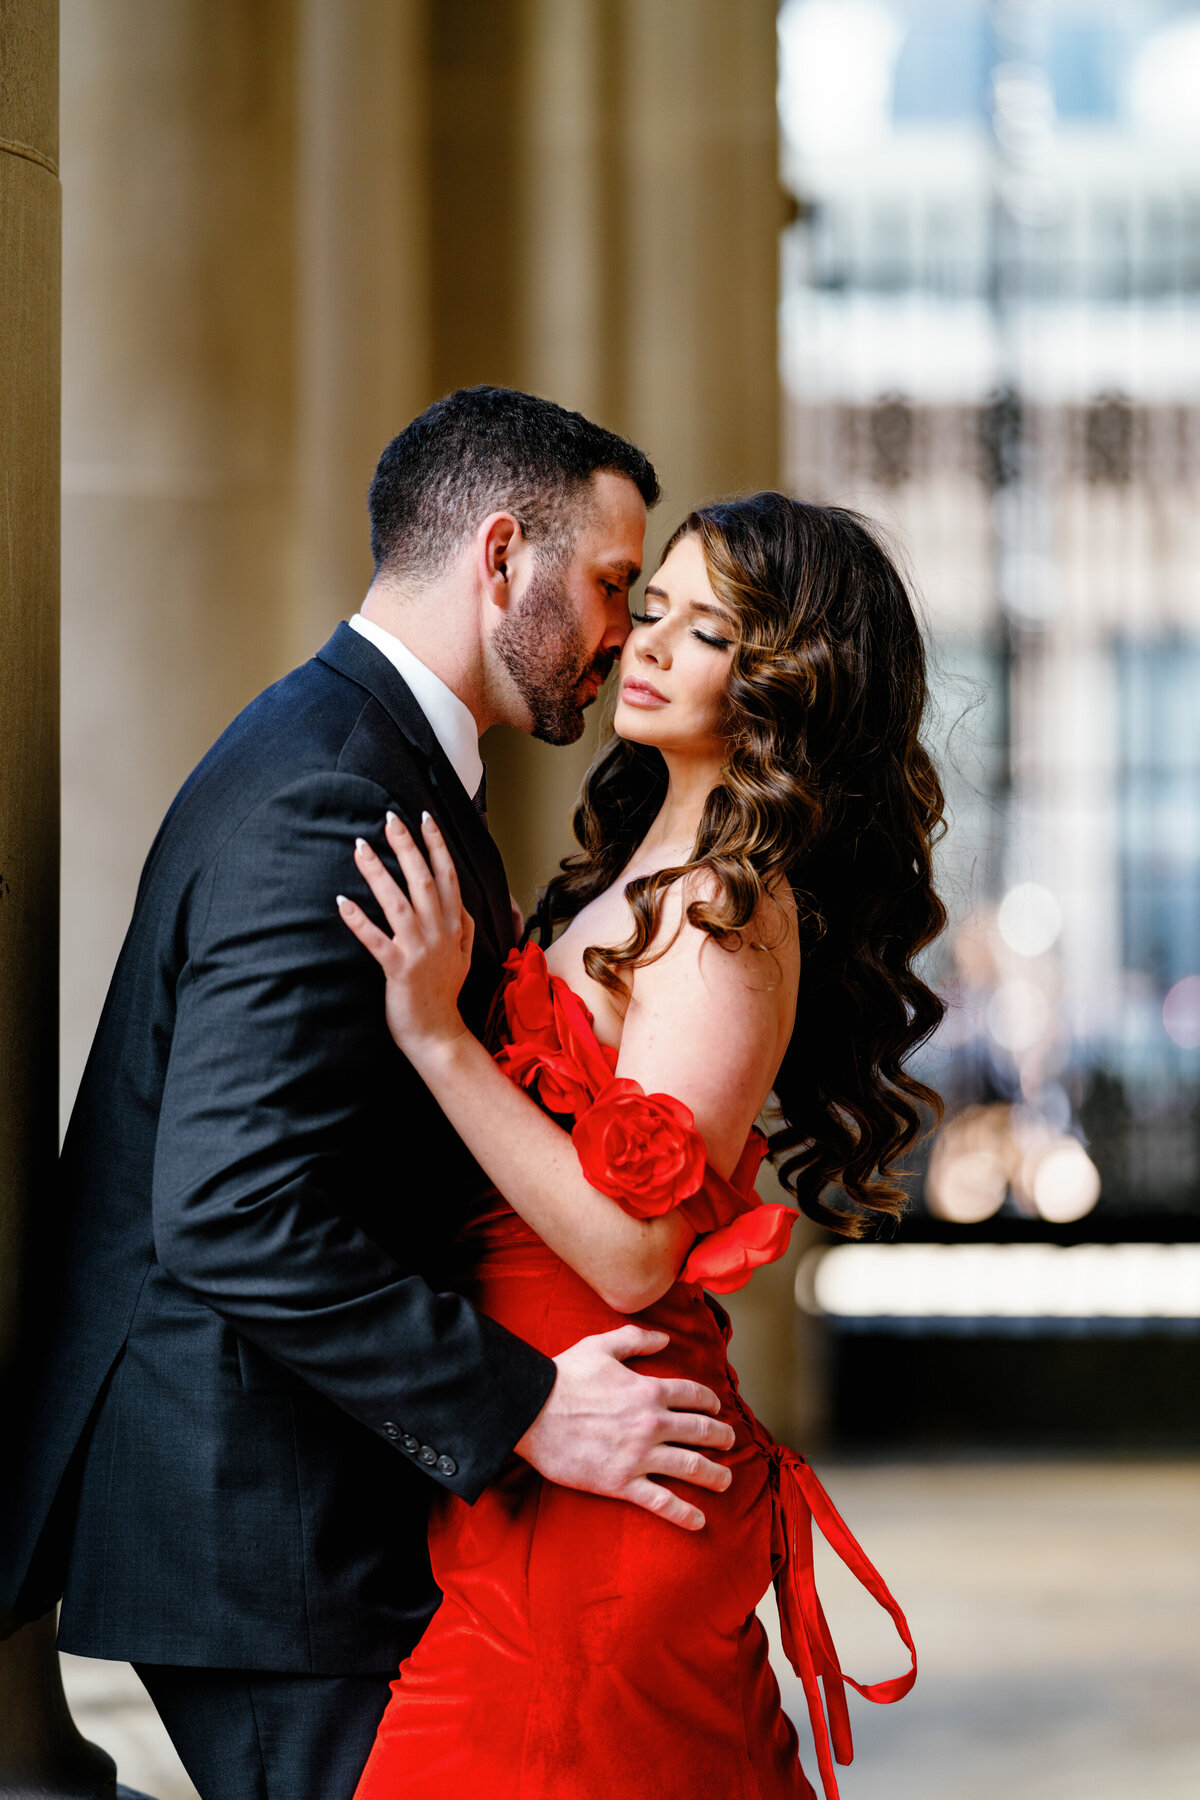 Aspen-Avenue-Chicago-Wedding-Photographer-Union-Station-Chicago-Theater-Engagement-Session-Timeless-Romantic-Red-Dress-Editorial-Stemming-From-Love-Bry-Jean-Artistry-The-Bridal-Collective-True-to-color-Luxury-FAV-57